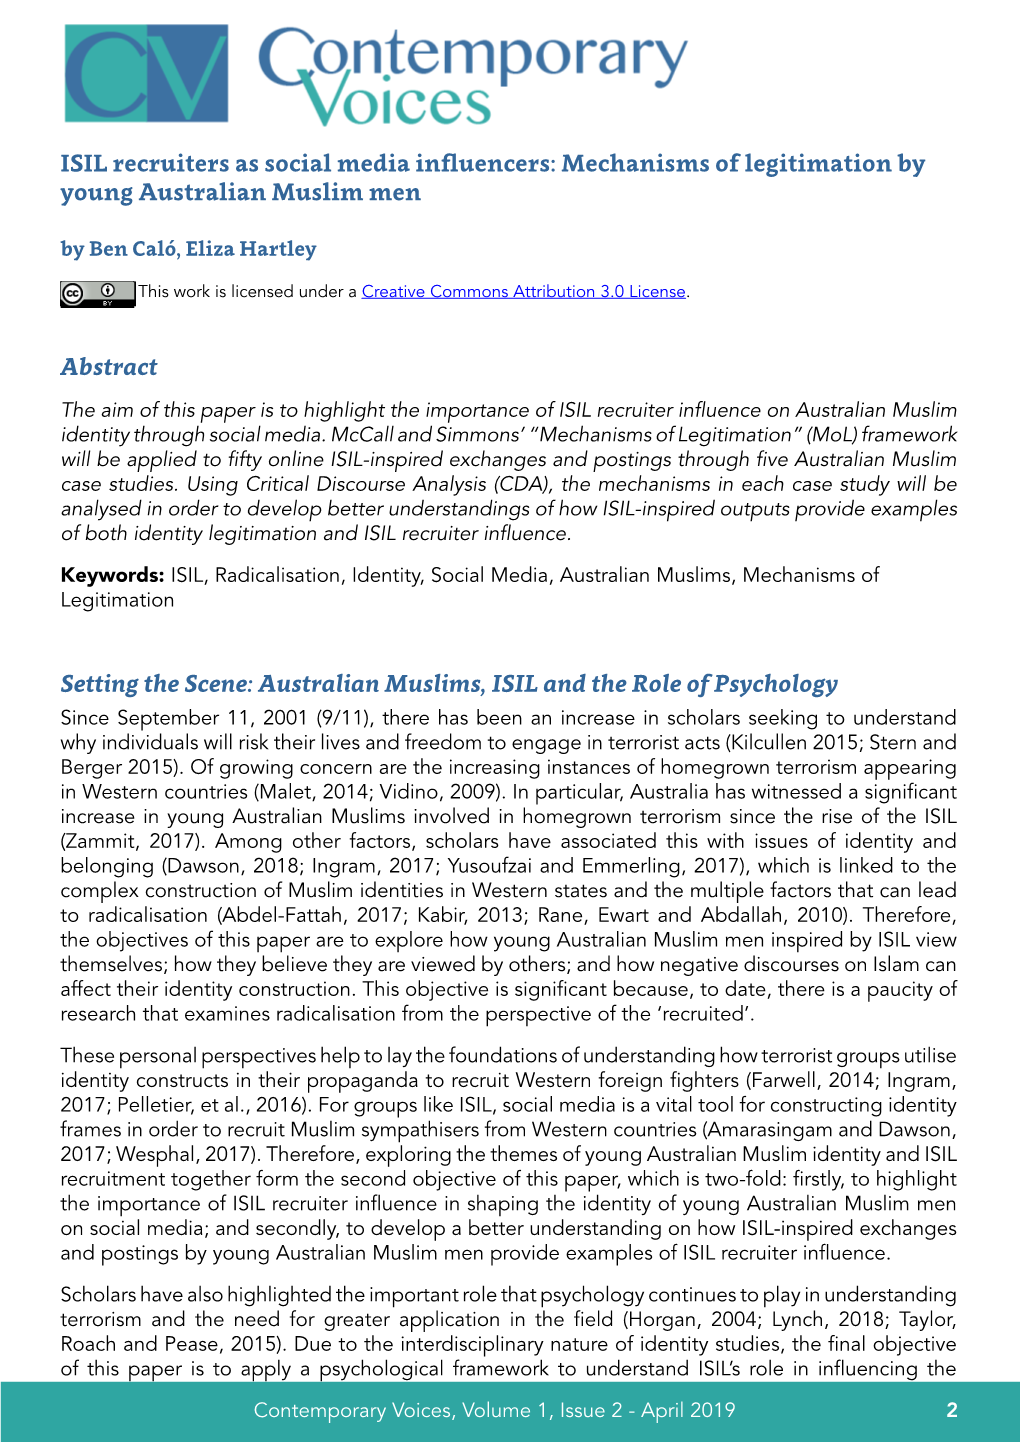 ISIL Recruiters As Social Media Influencers: Mechanisms of Legitimation by Young Australian Muslim Men Abstract Setting the Scen